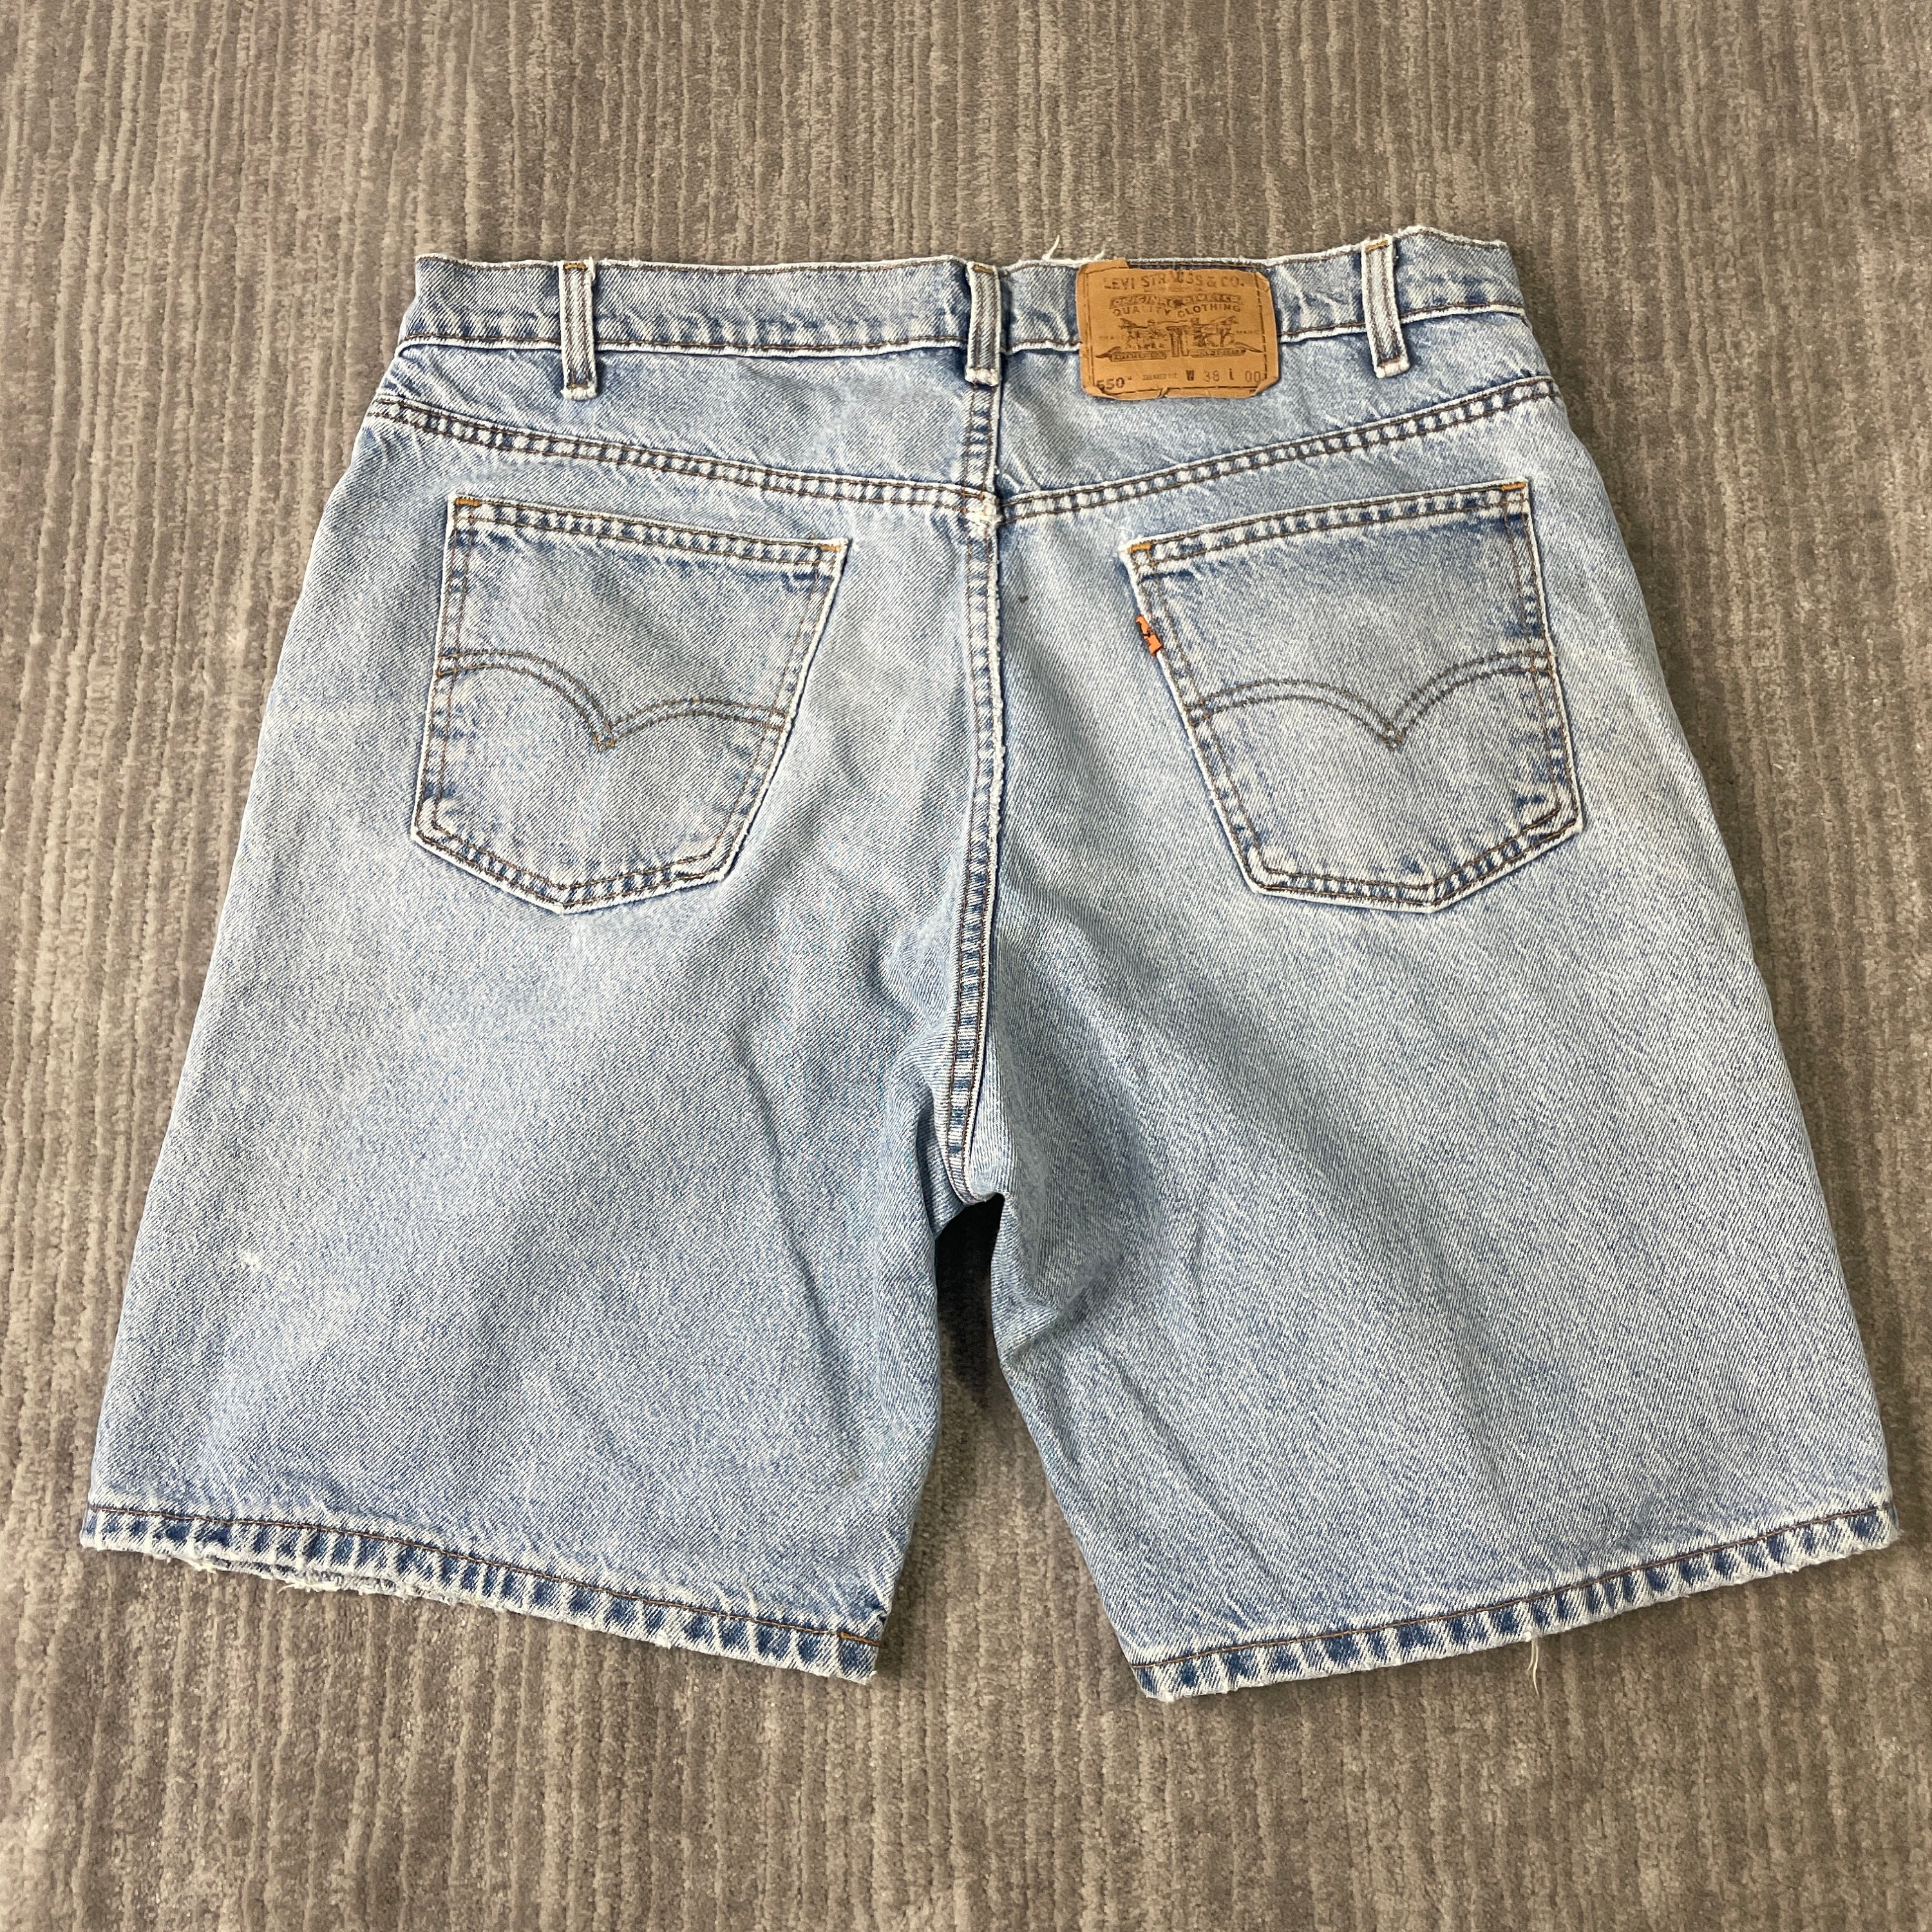 Red Tab Levis Shorts - Etsy